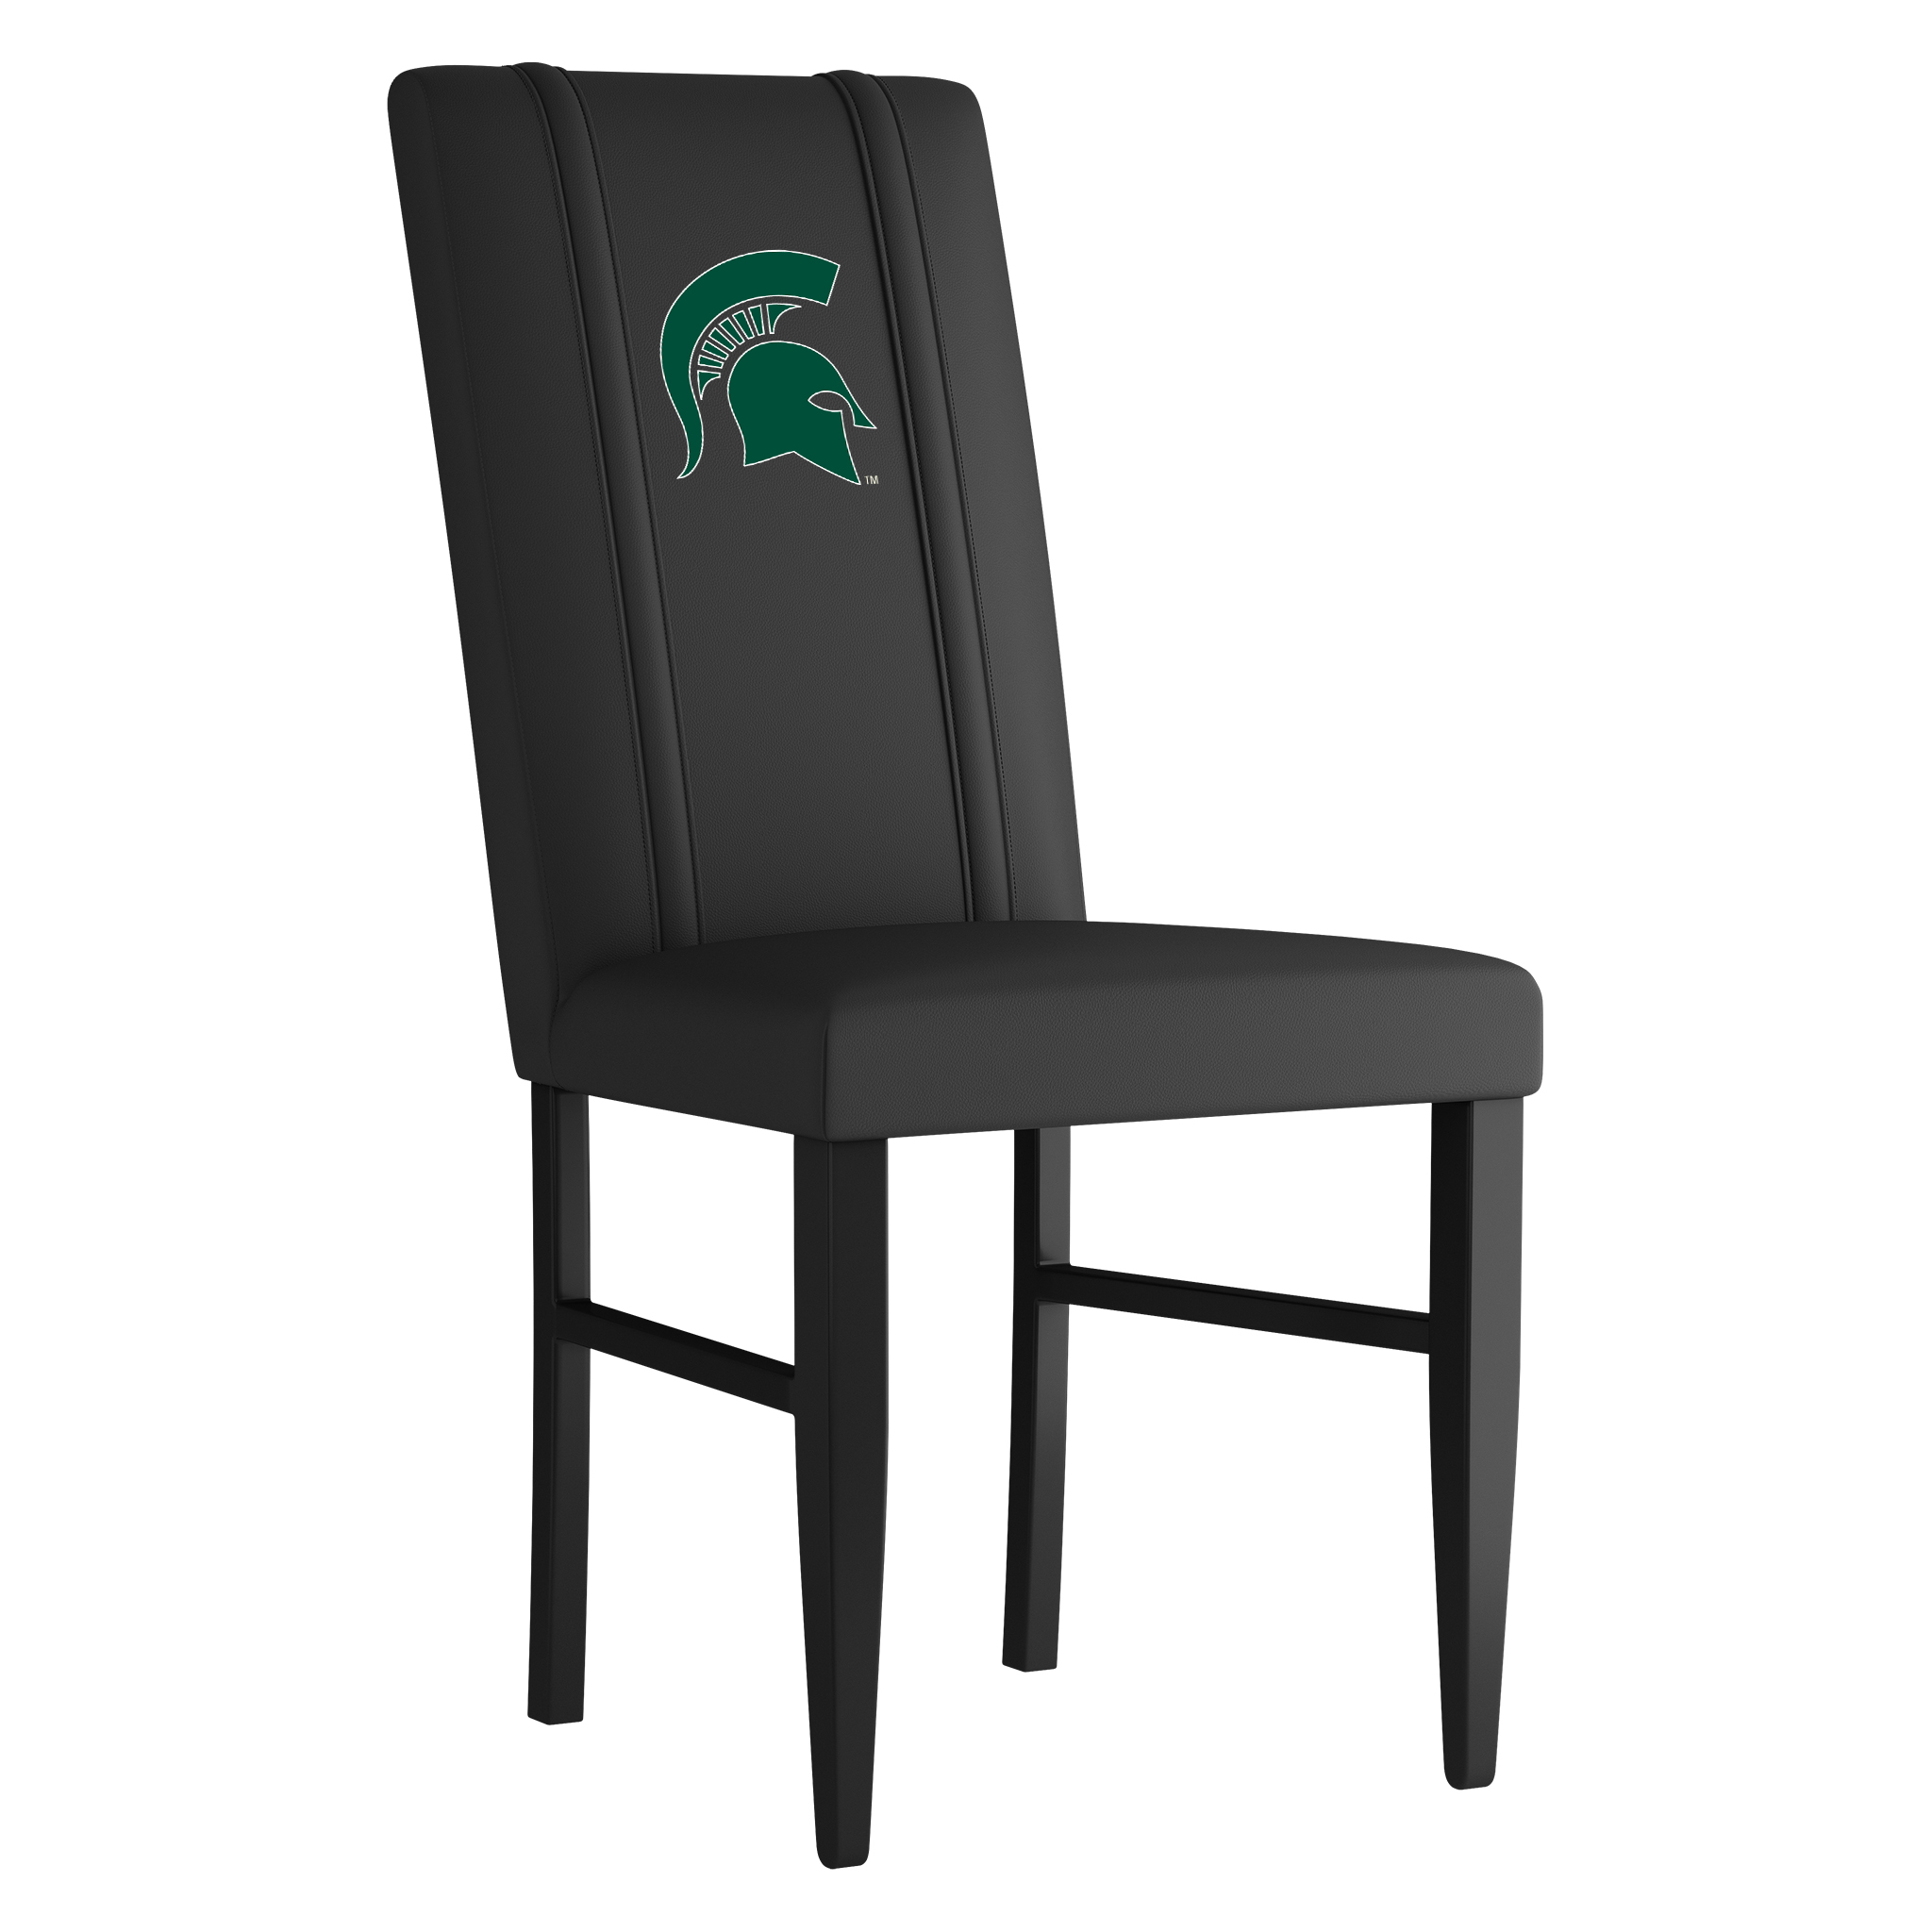 Michigan State Spartans Side Chair 2000 With Michigan State Spartans Logo